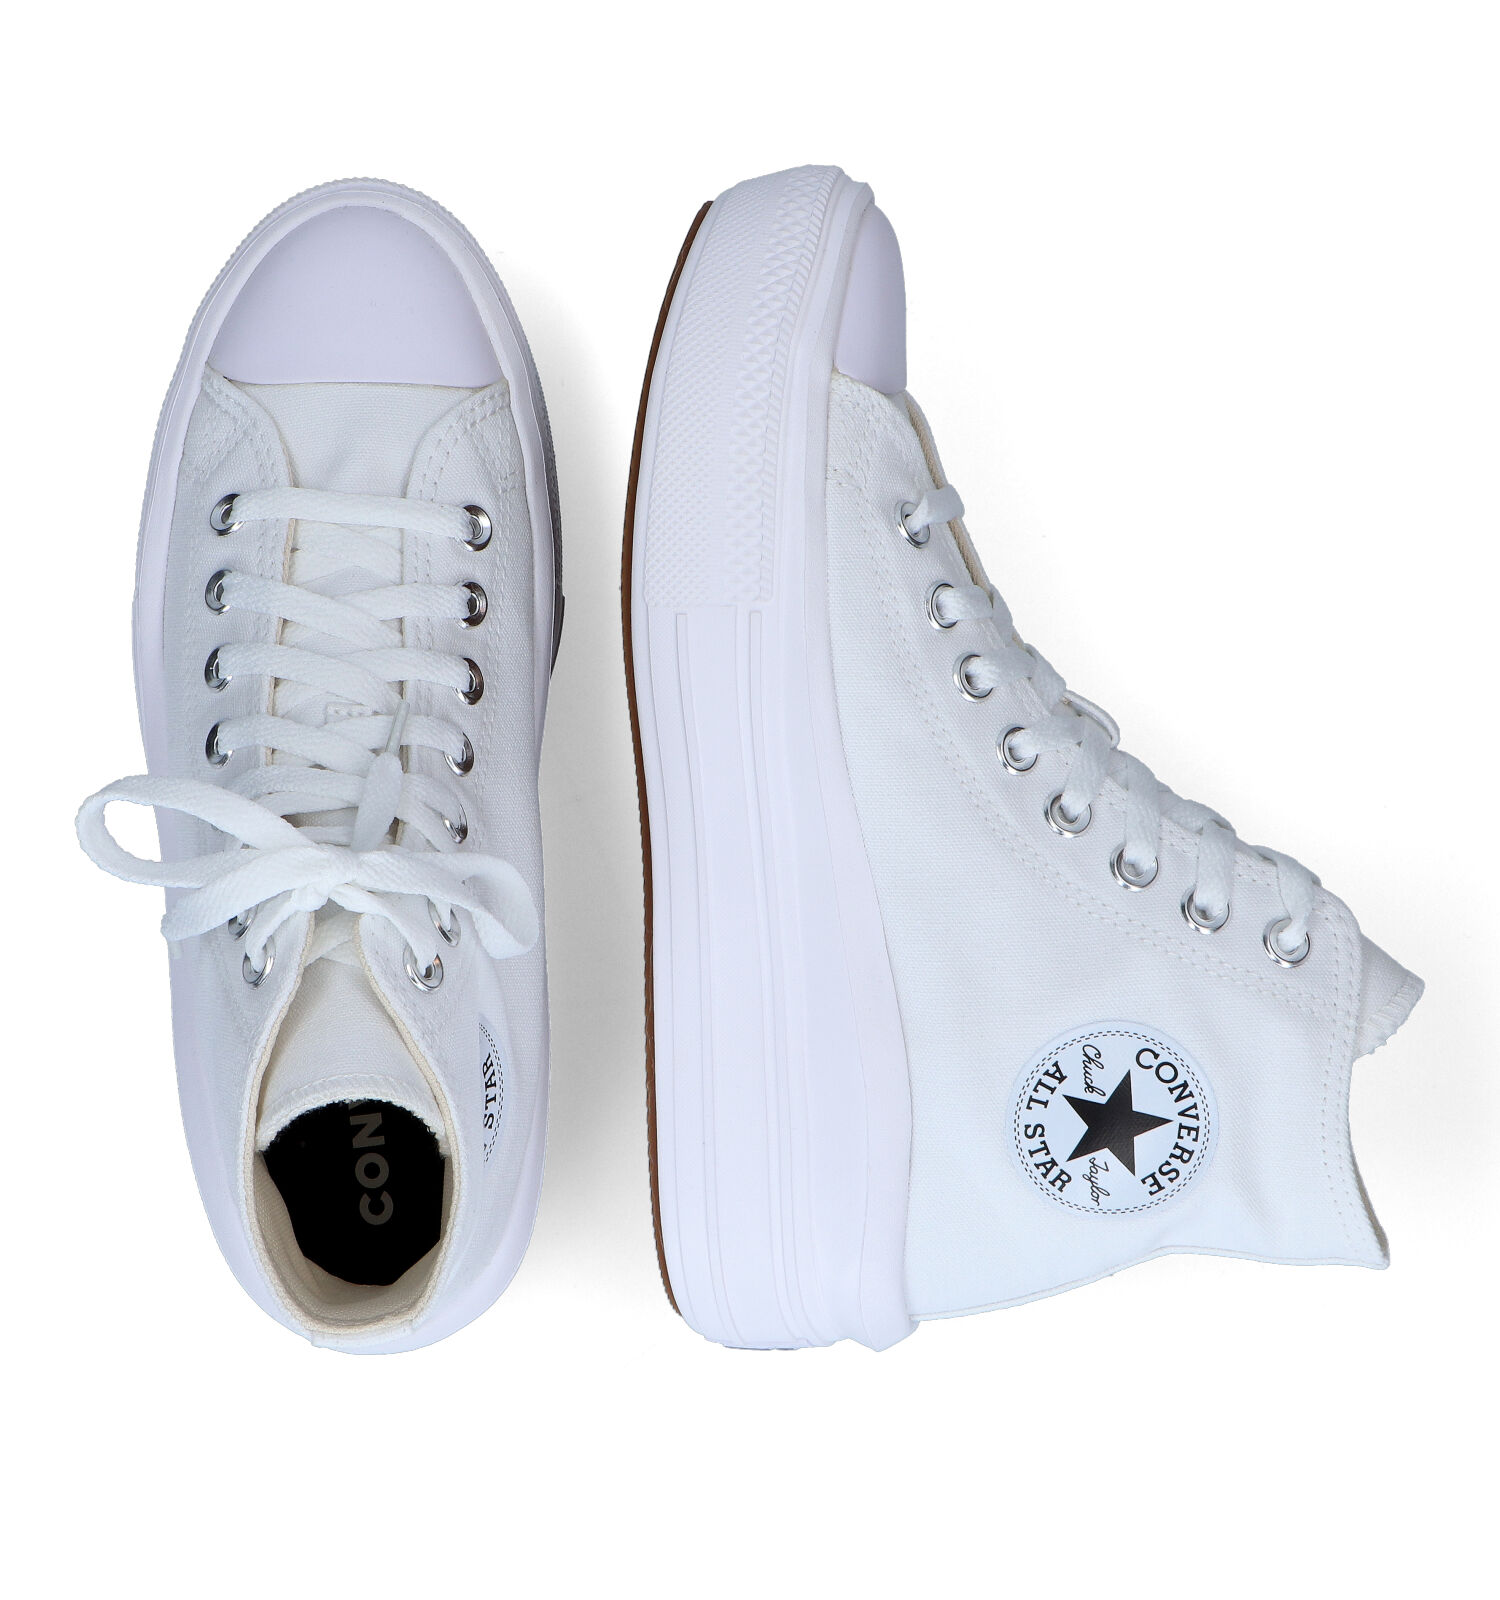 Fysica Verliefd Scheiding Converse Chuck Taylor AS Move High Witte Sneakers | Dames Sneakers